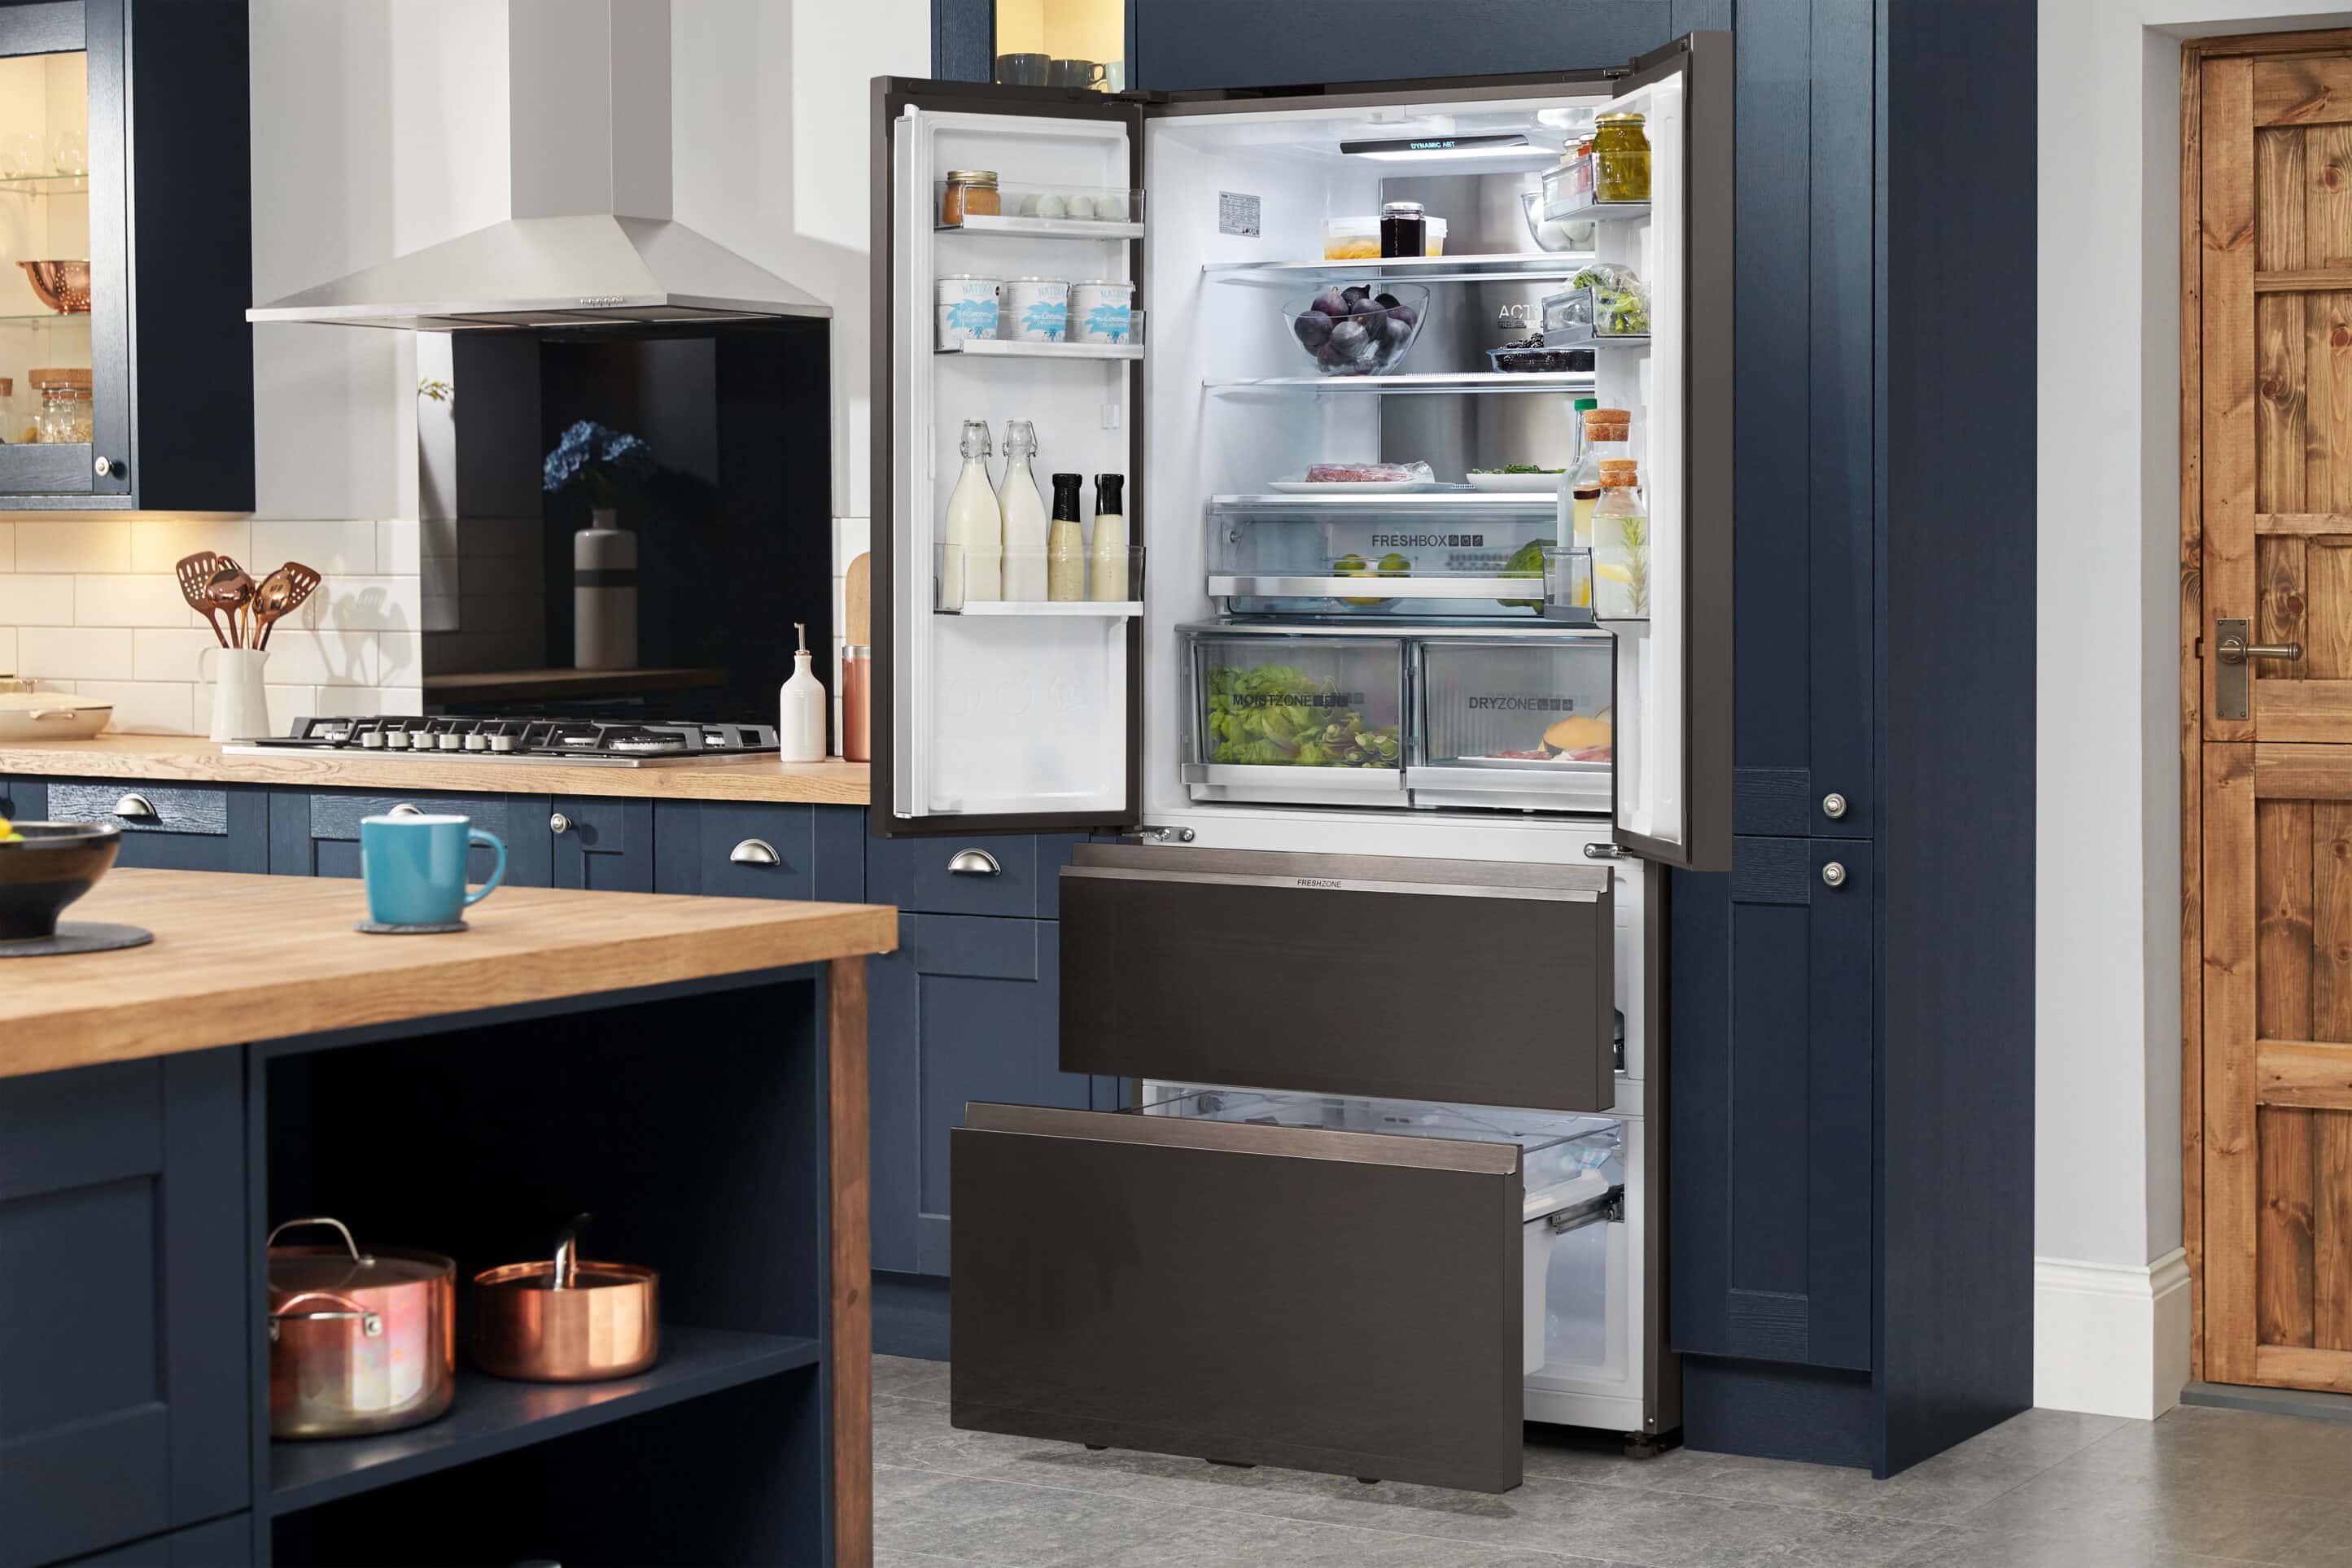 What’s The Difference Between A French Door Fridge Freezer And An American Fridge Freezer?